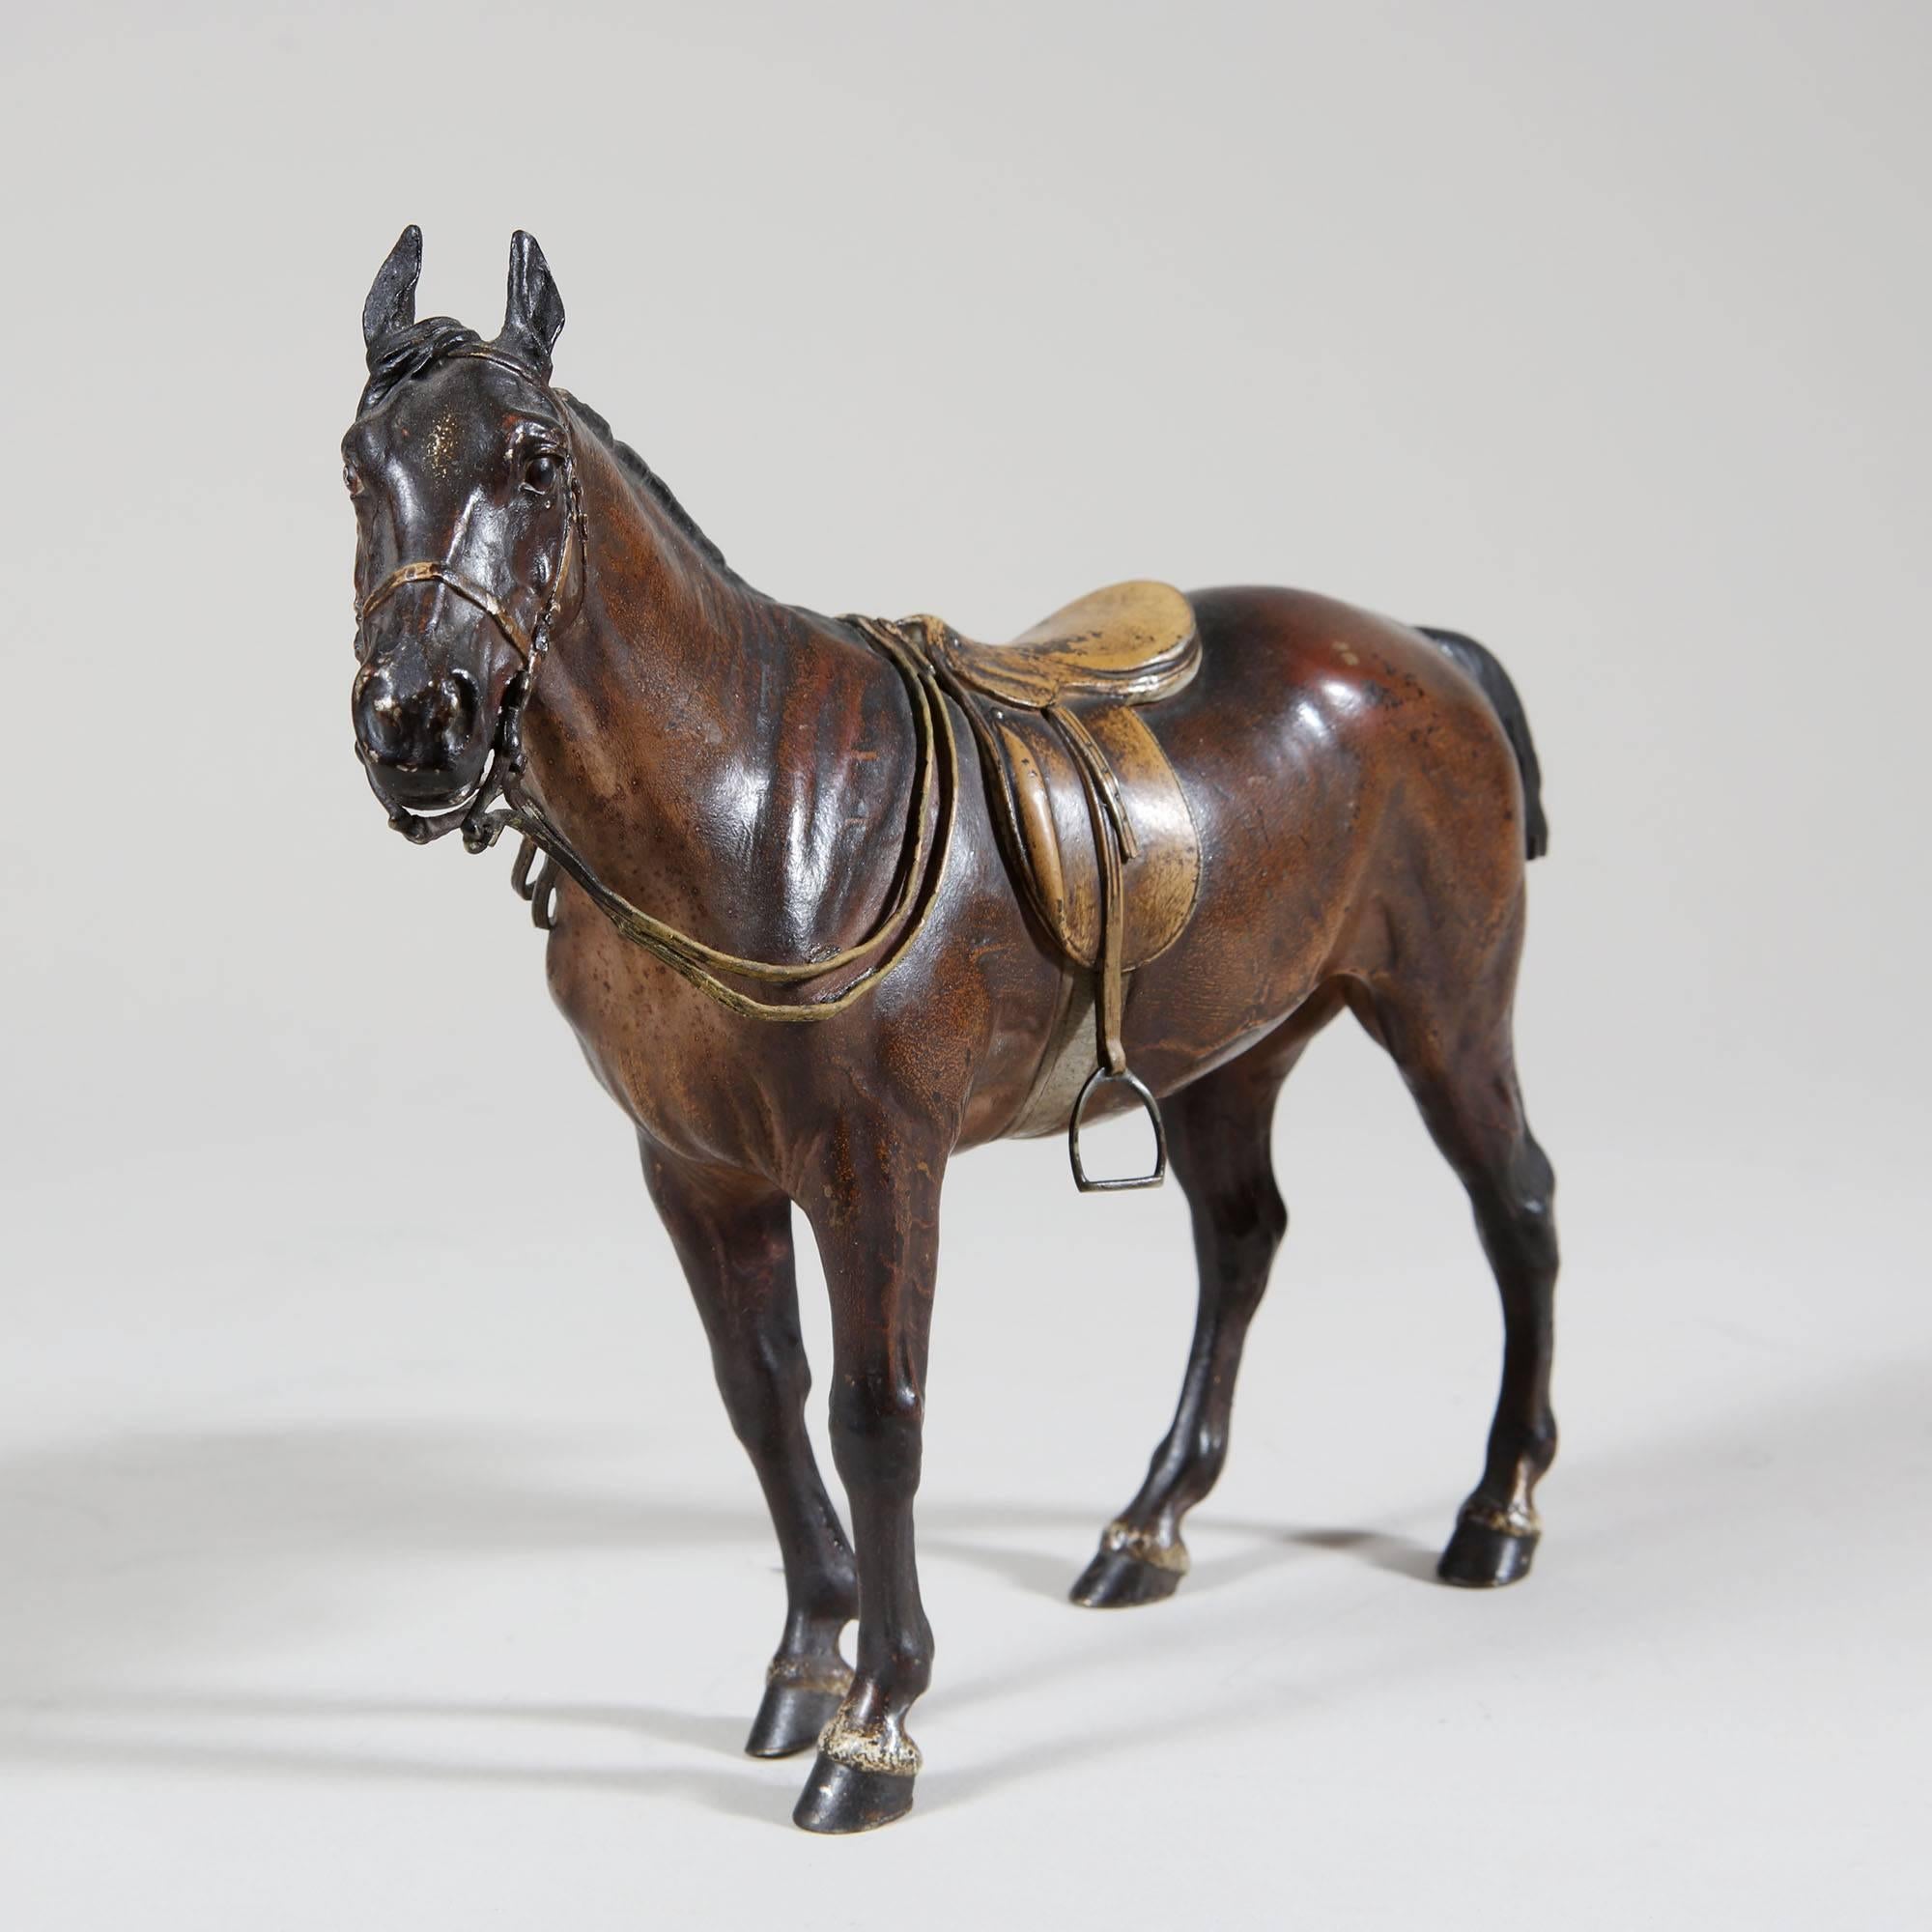 A patinated and cold painted bronze horse
By Franz Xavier Bergman
Stamped with the Foundry Mark
Austria, Vienna, late 19th century.